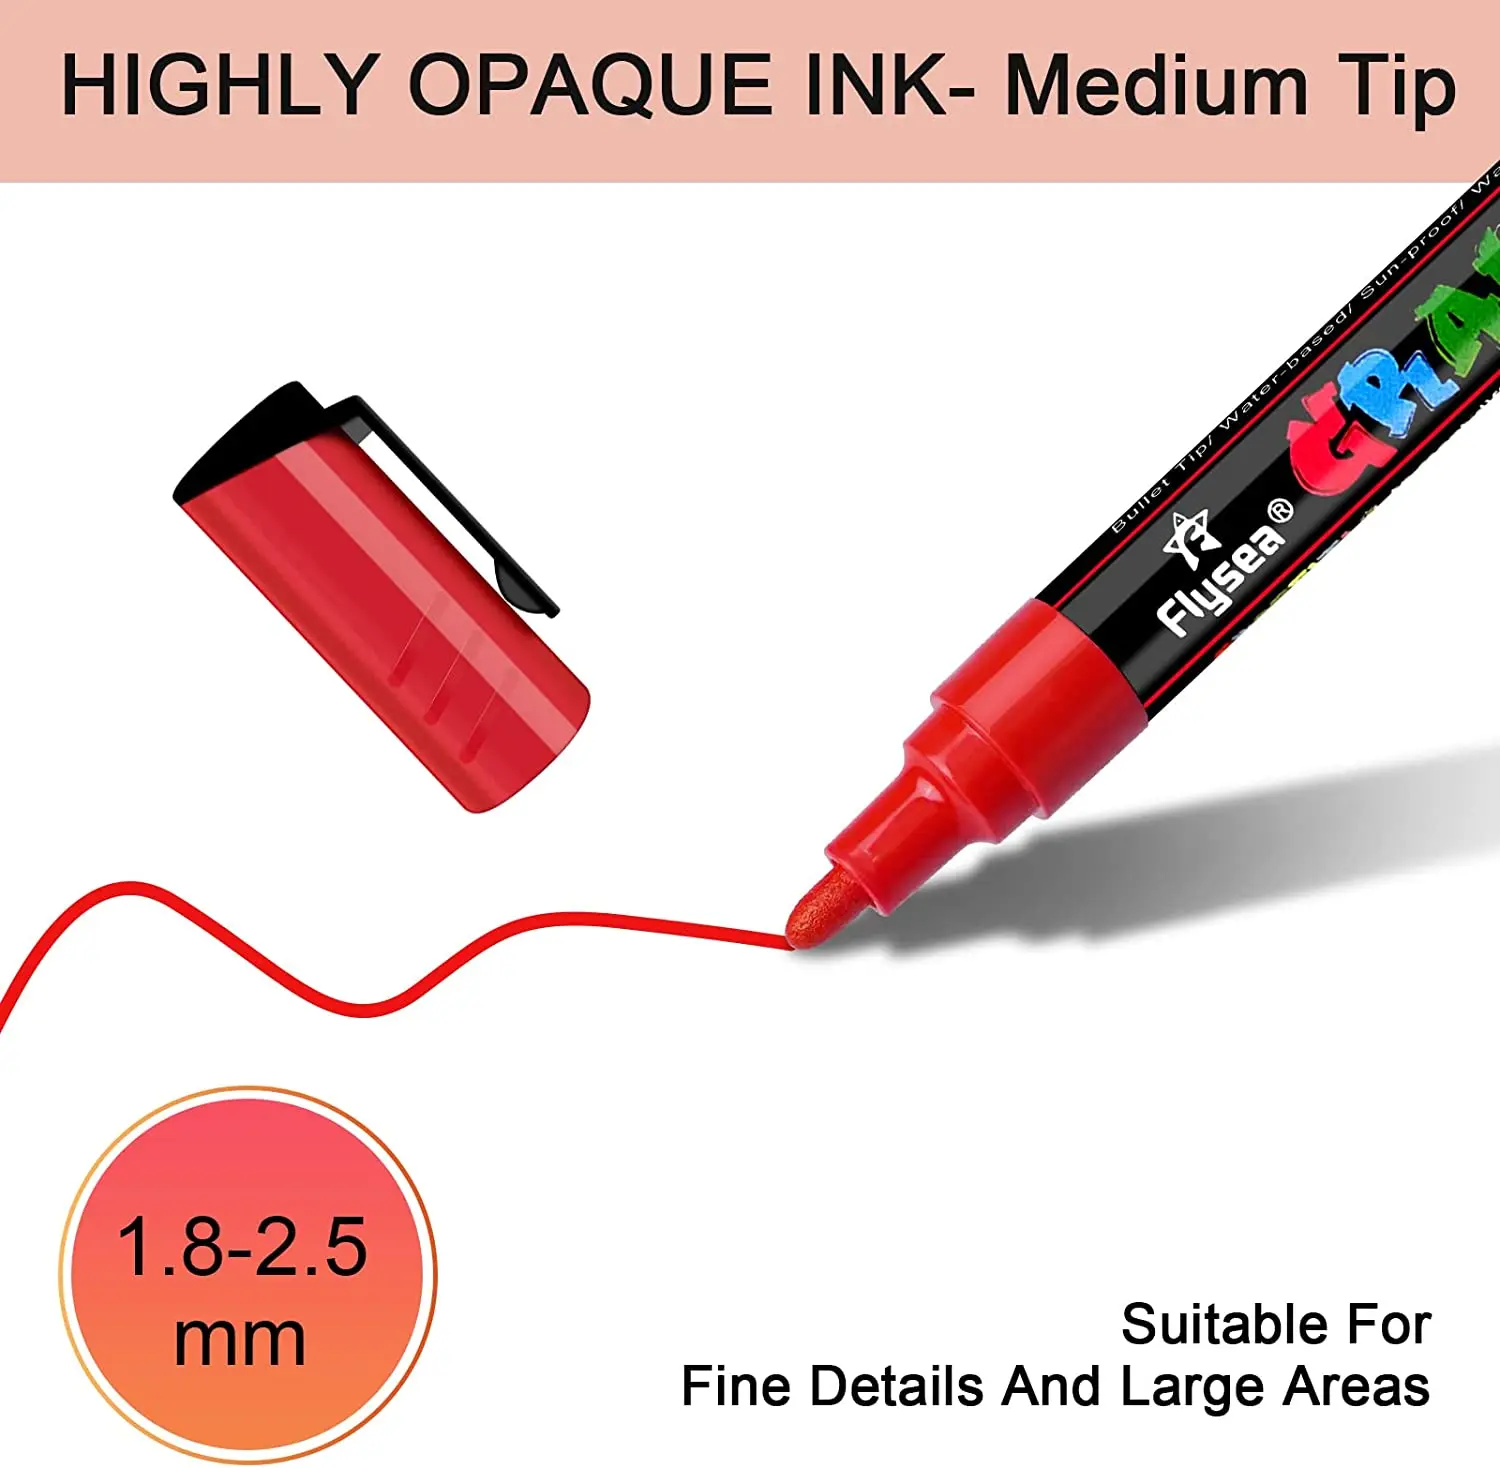 Acrylic Marker Small Red Book D Tiktok Same DIY Painting Art Special  Waterproof and Non Fading Graffiti Watercolor Pen - AliExpress